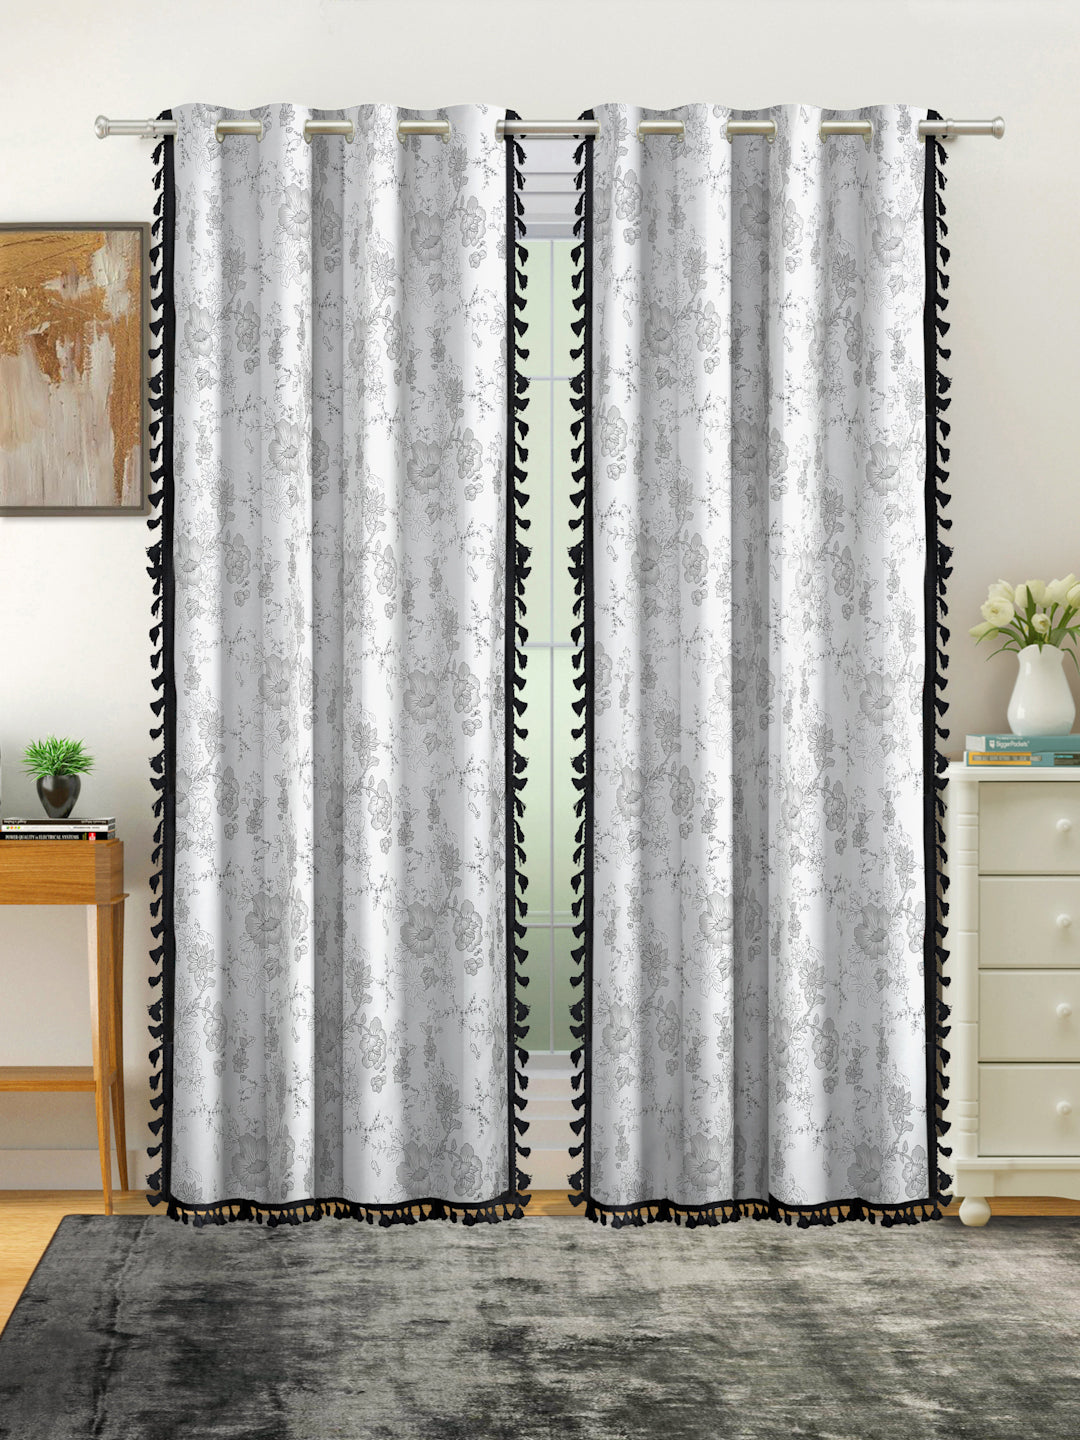 Cotton Printed Boho Light Filtering Long Door Curtain with Lace- Cream (Pack of 1)